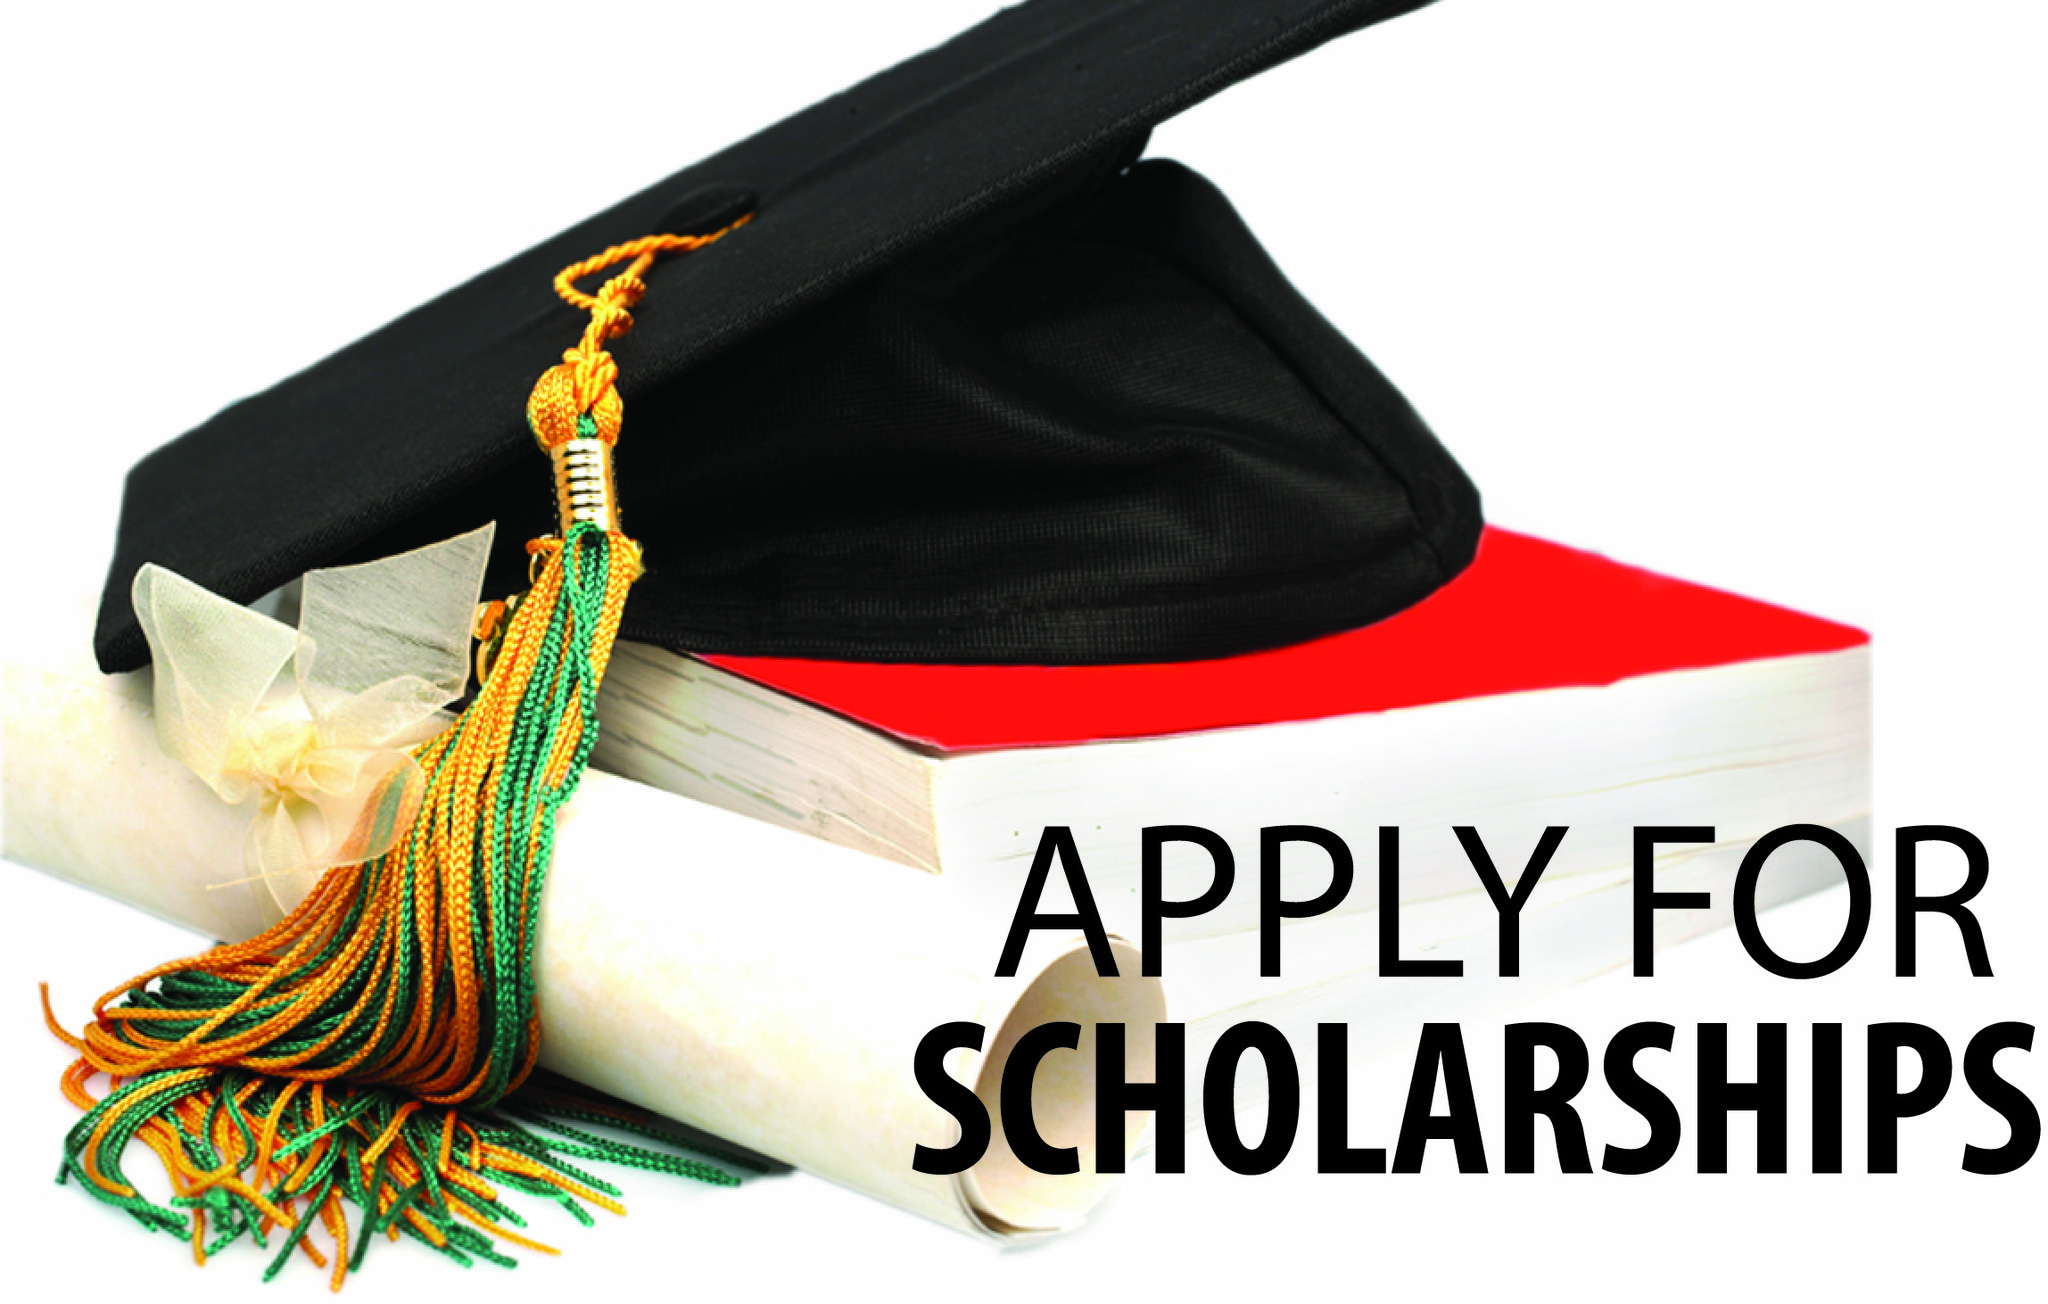 CLICK HERE FOR SCHOLARSHIPS